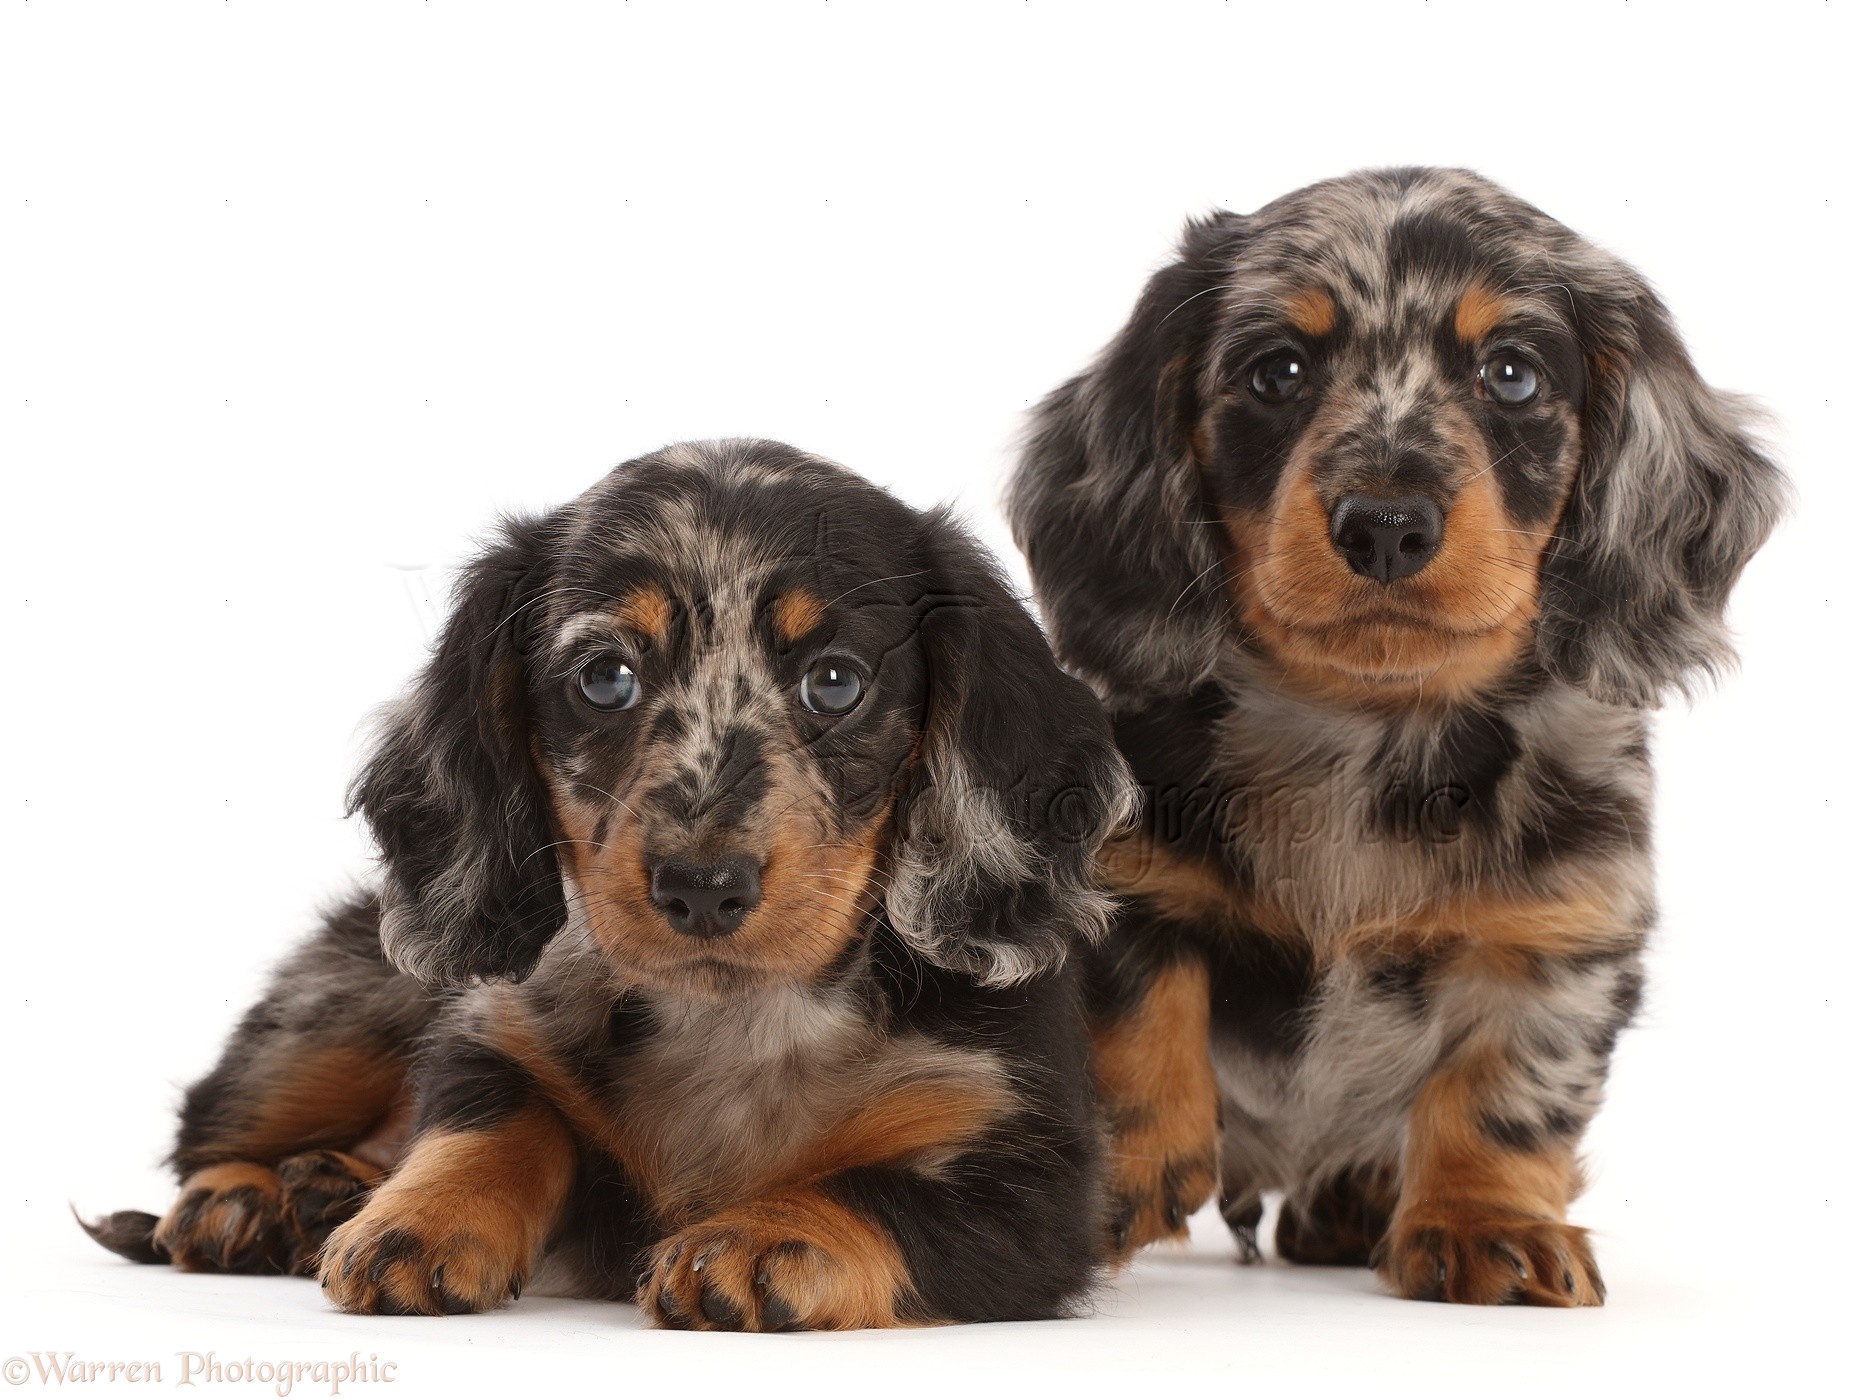 Dogs: Long-haired Dapple Dachshund puppies, 7 weeks old photo WP49207